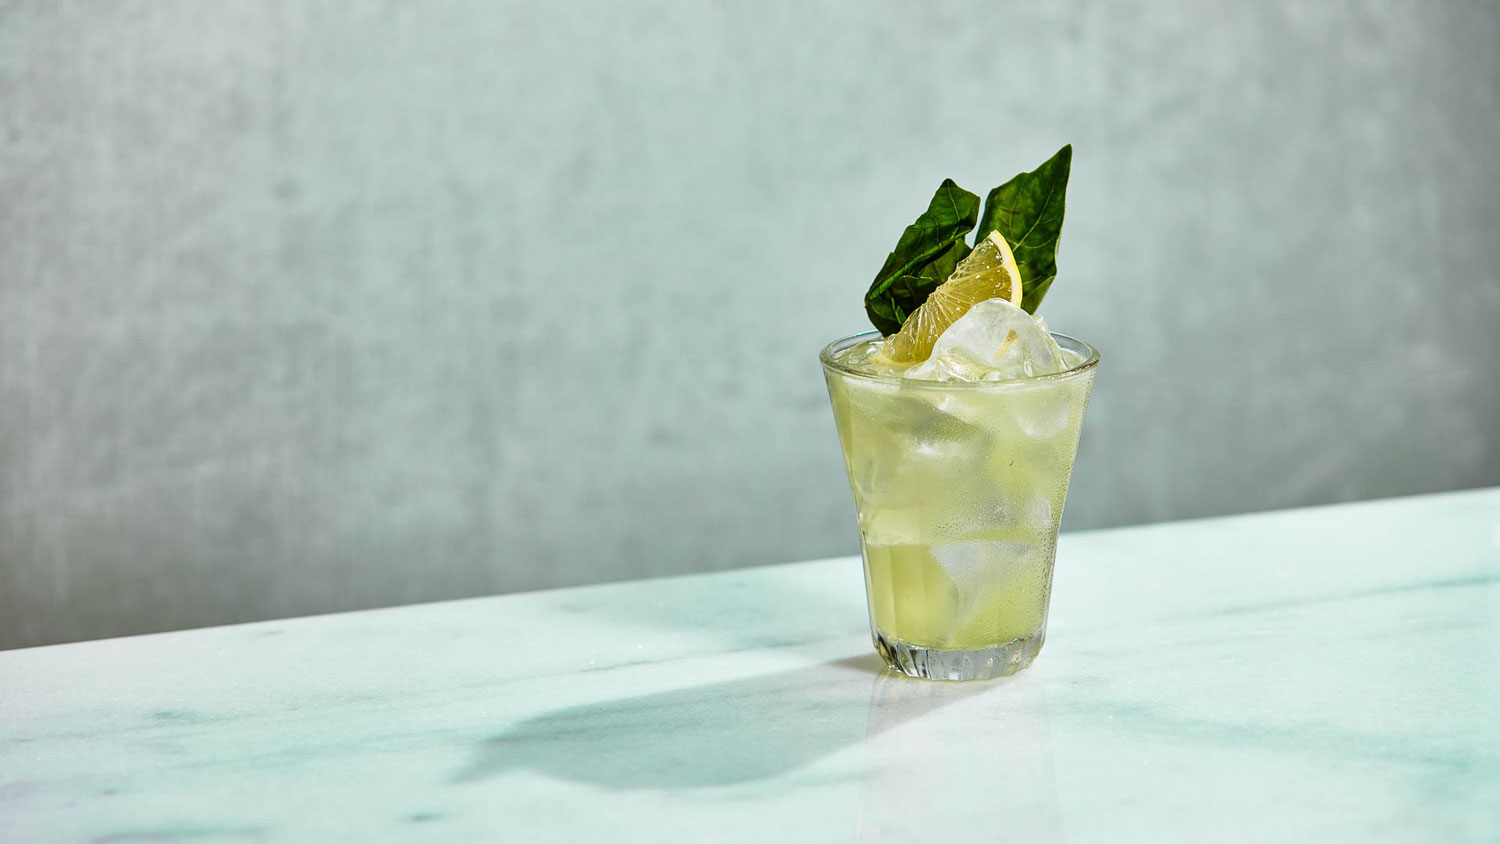 A glass of Basil Smash on a textured surface